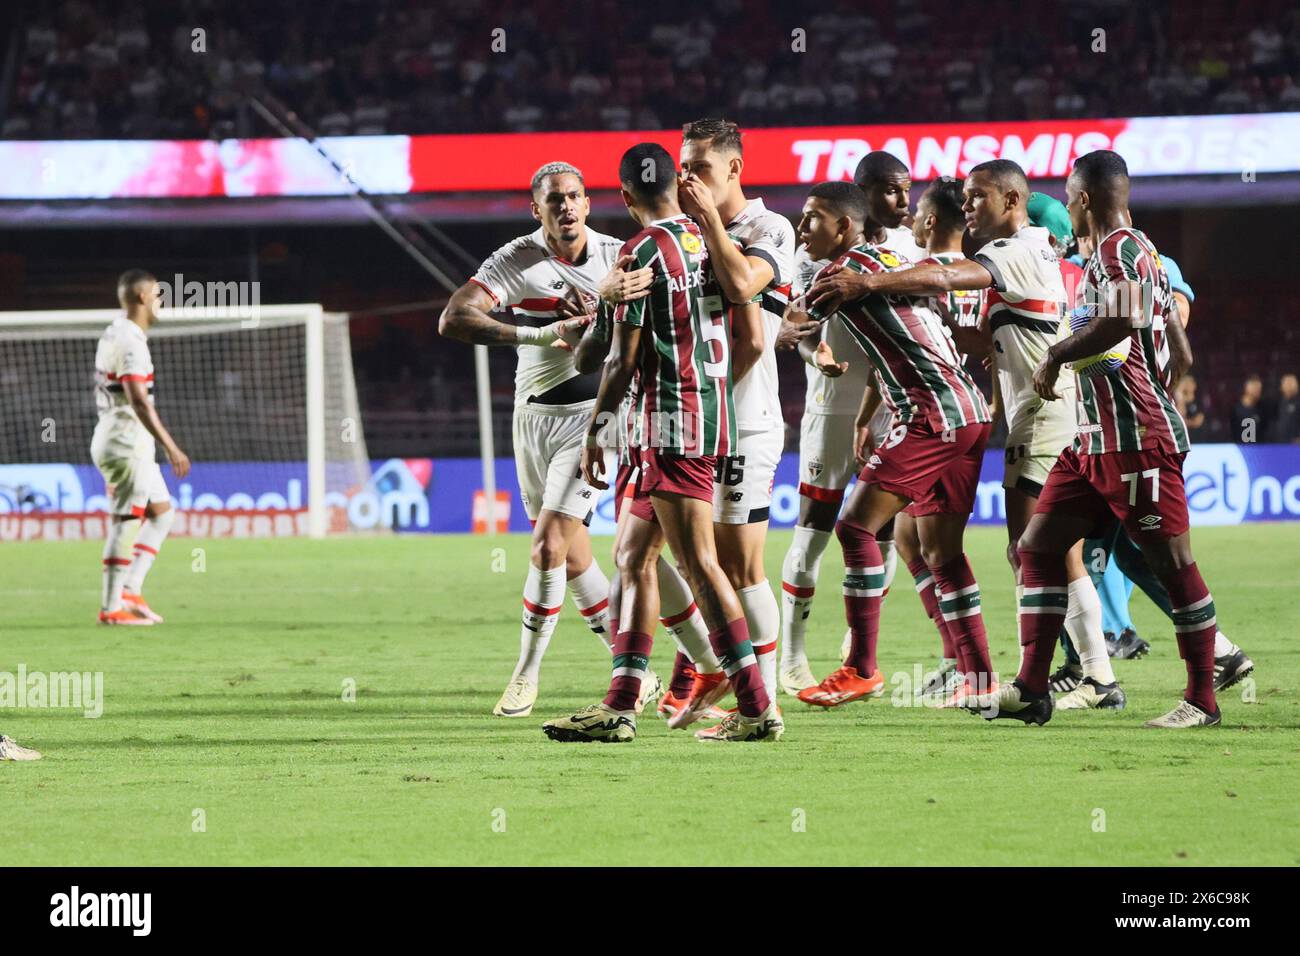 May 13, 2024, Sao Paulo, Sao Paulo, Brasil: Sao Paulo (SP), 05/13/2024 - CHAMPIONSHIP/FOOTBALL/SAO PAULO/FLUMINENSE - Coach Fernando Diniz, from Fluminense, gets involved in an argument with striker Luciano, from Sao Paulo, causing widespread confusion during the match between Sao Paulo and Fluminense, valid for the 6th round of the Brazilian Championship Series A 2024, held at the Morumbis stadium, in the capital of Sao Paulo, on Monday night (13). Referee Anderson Daronco sent off the coach of the Rio club and penalized the home team's striker with a yellow card. Sao Paulo won the match 2-1. Stock Photo